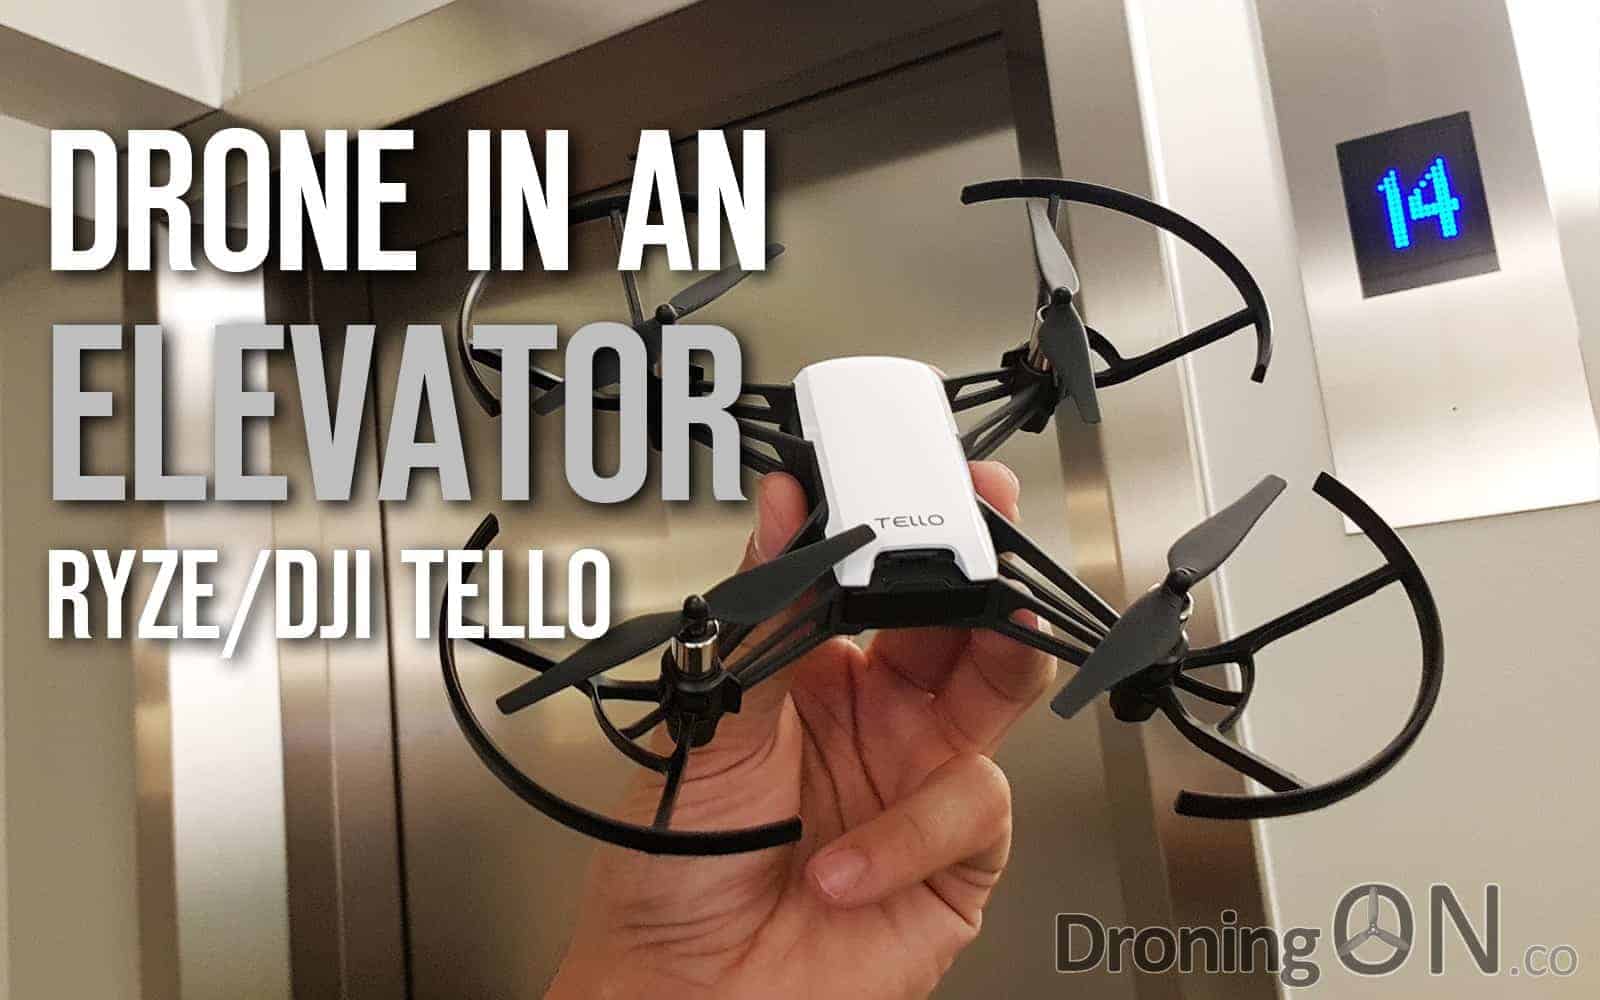 Will a Ryze/DJI Tello fly in a moving lift whilst ascending or descending? Drone experiment!